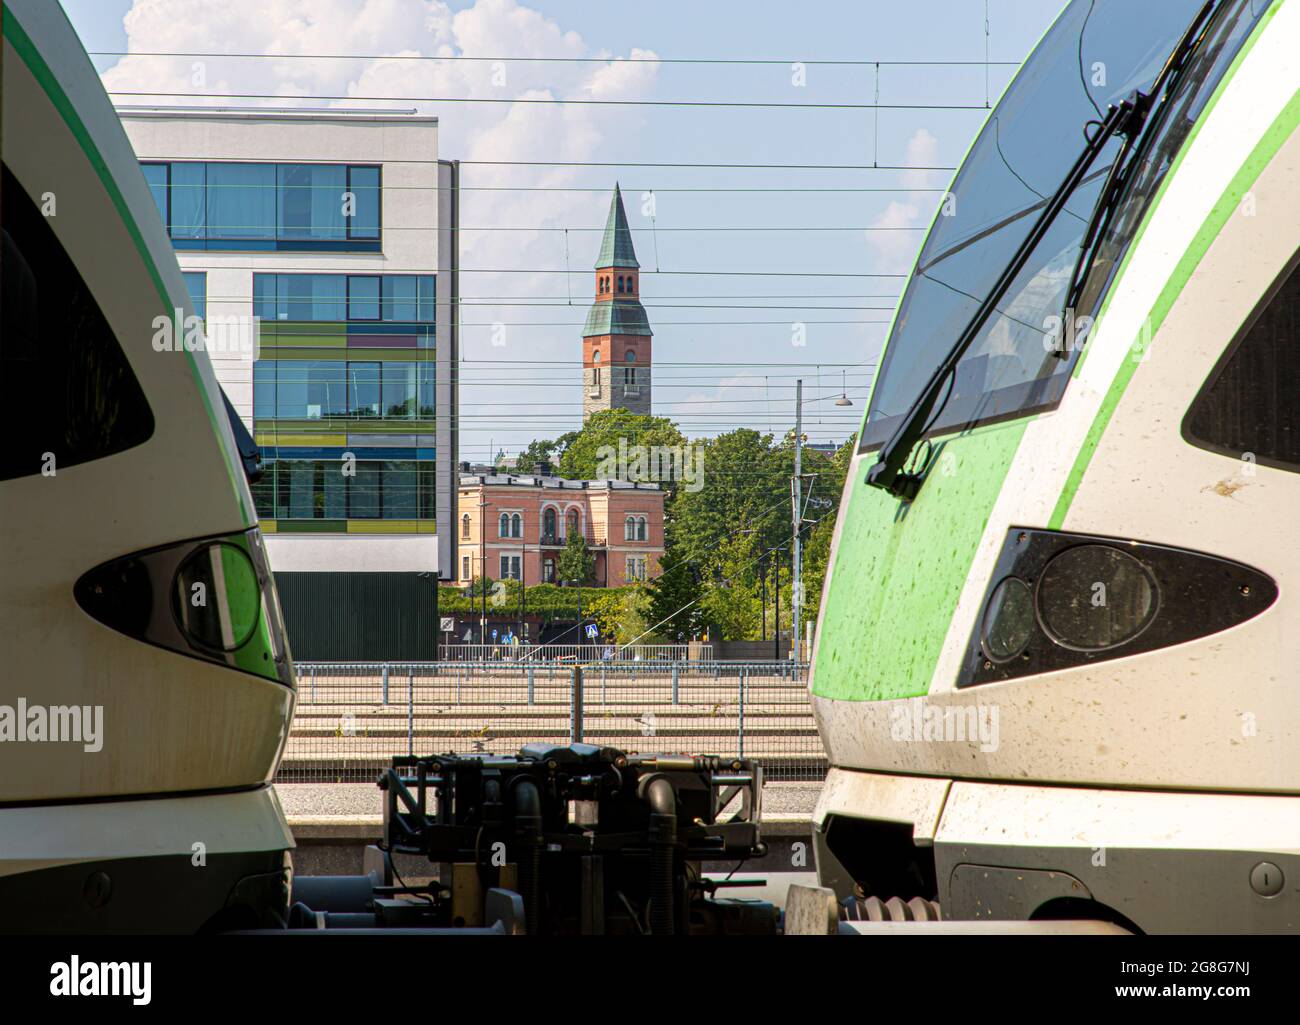 National Museum of Finland and Villa Hakasalmi against a foreground of a Stadler FLIRT trainset and a building at the Helsinki central railway station. Stock Photo